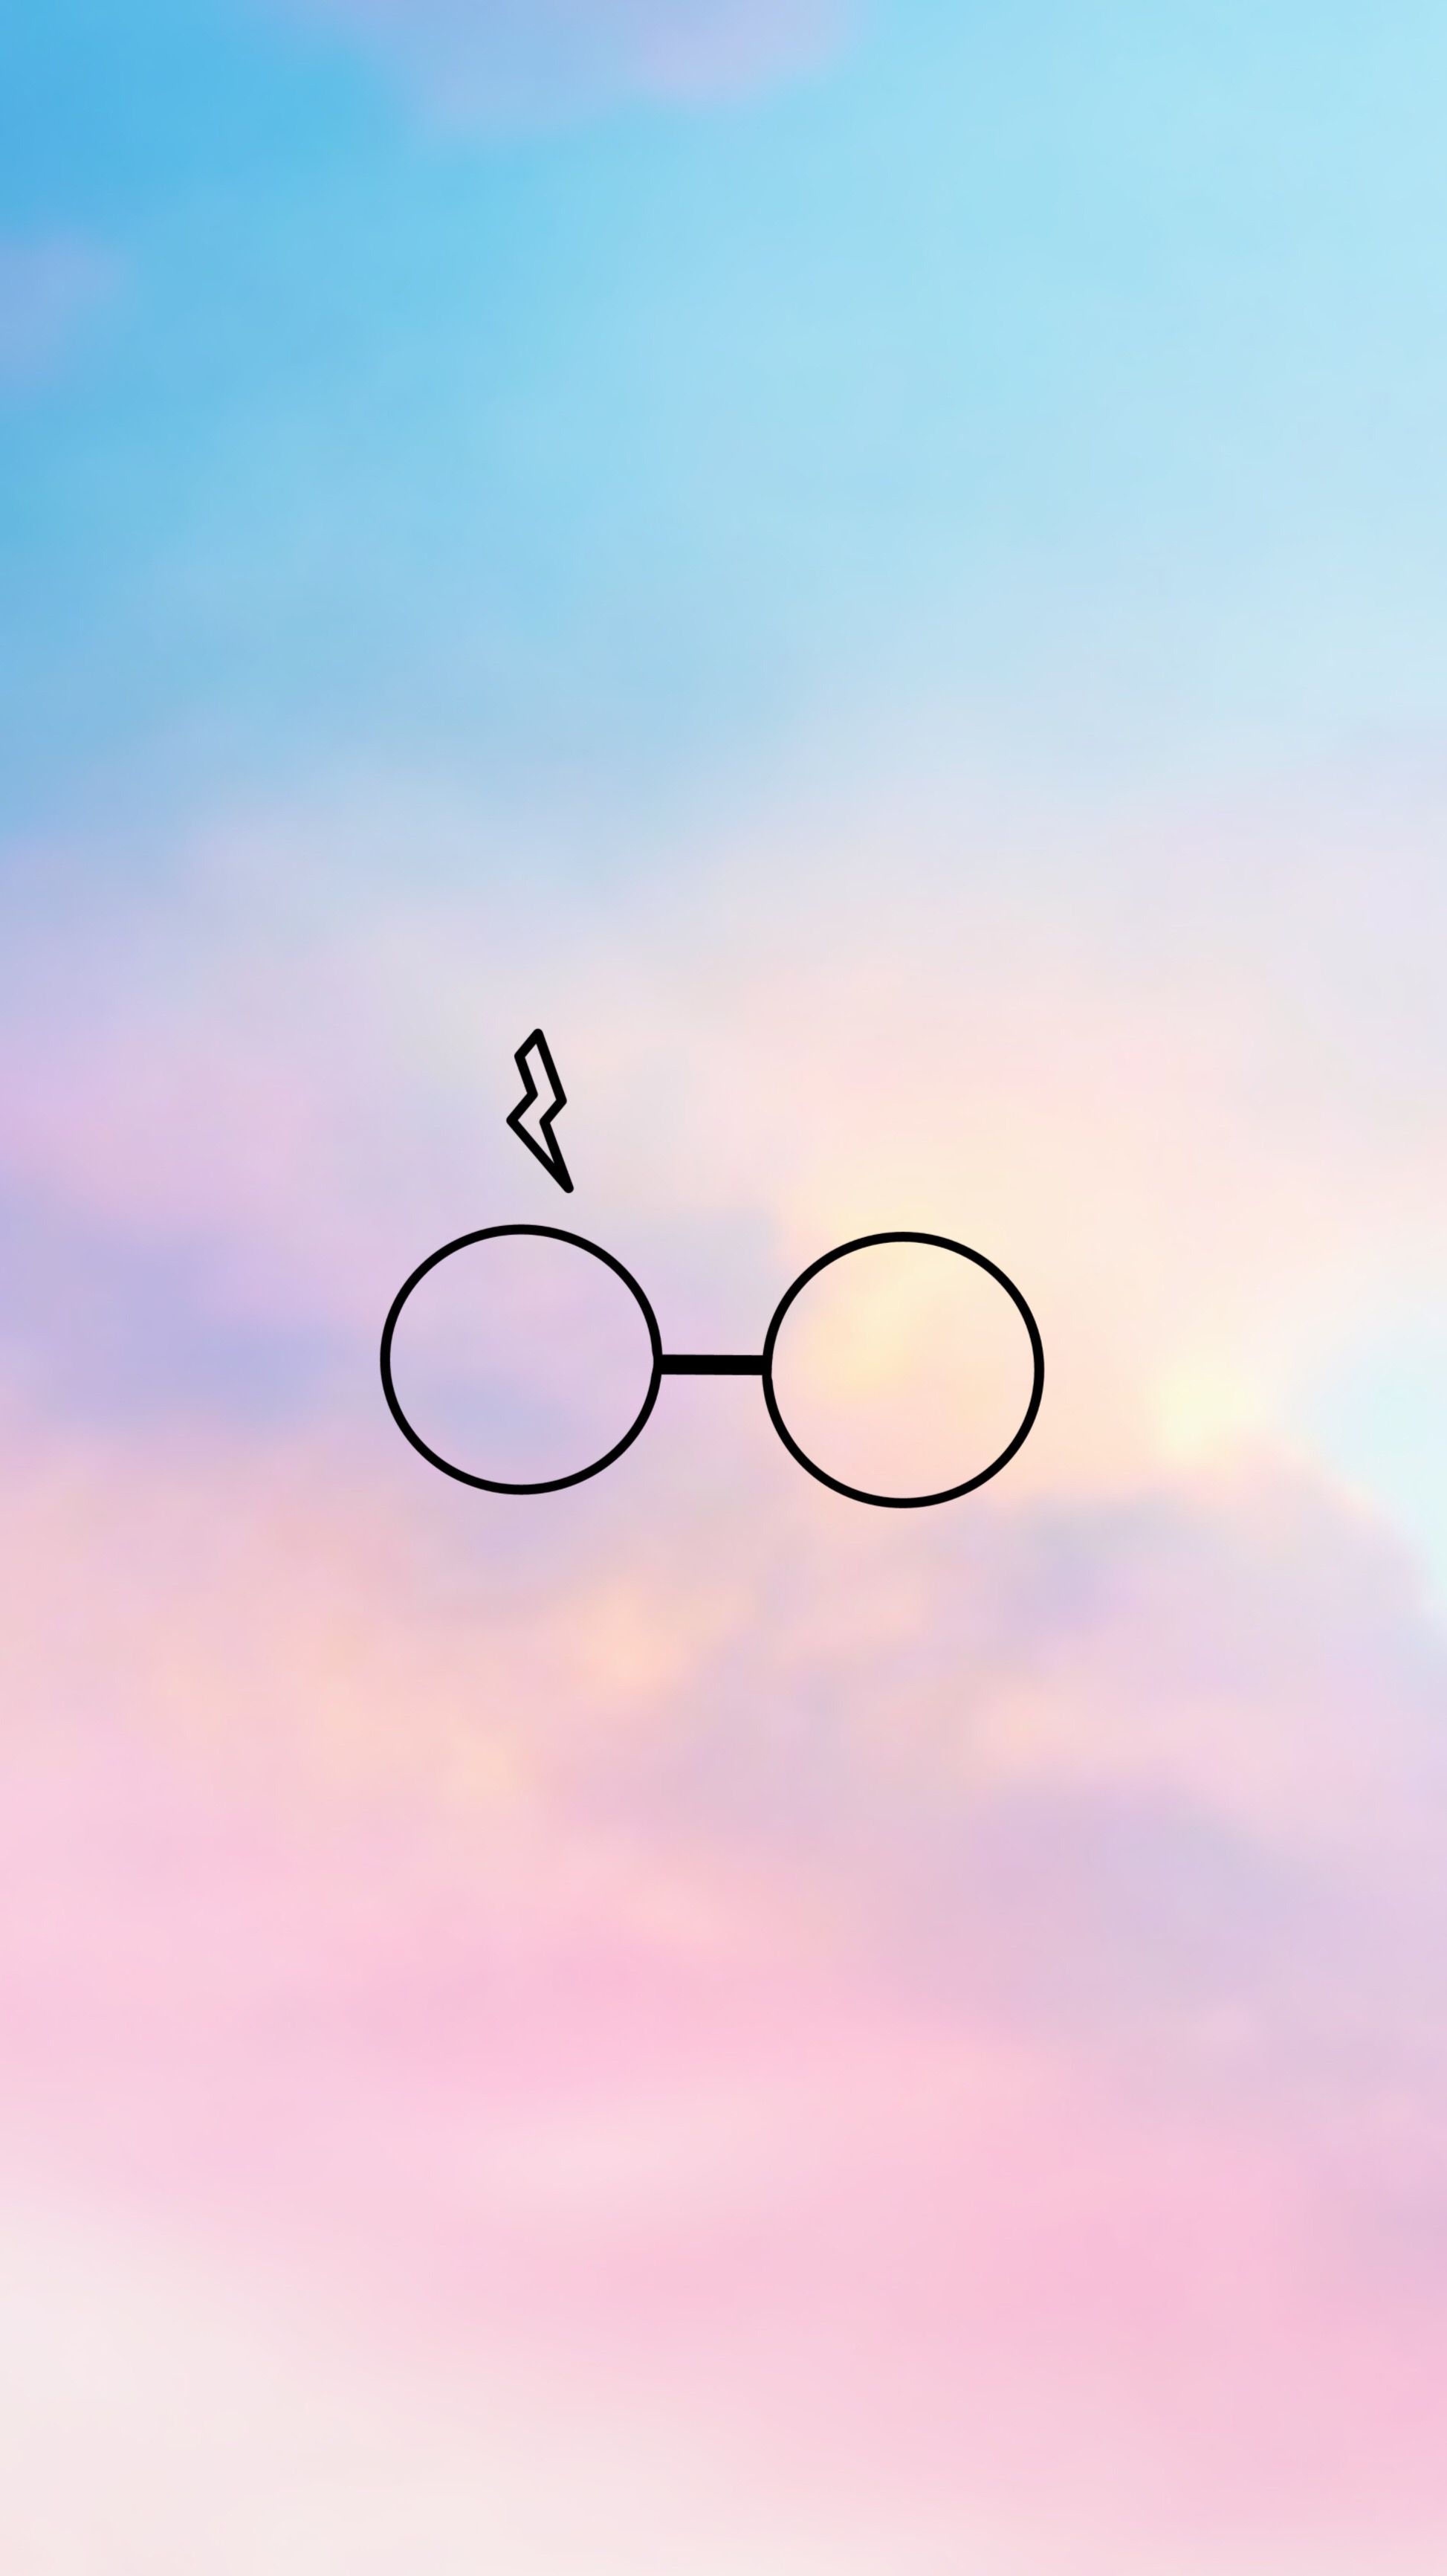 A picture of glasses on top with clouds in the background - Harry Potter